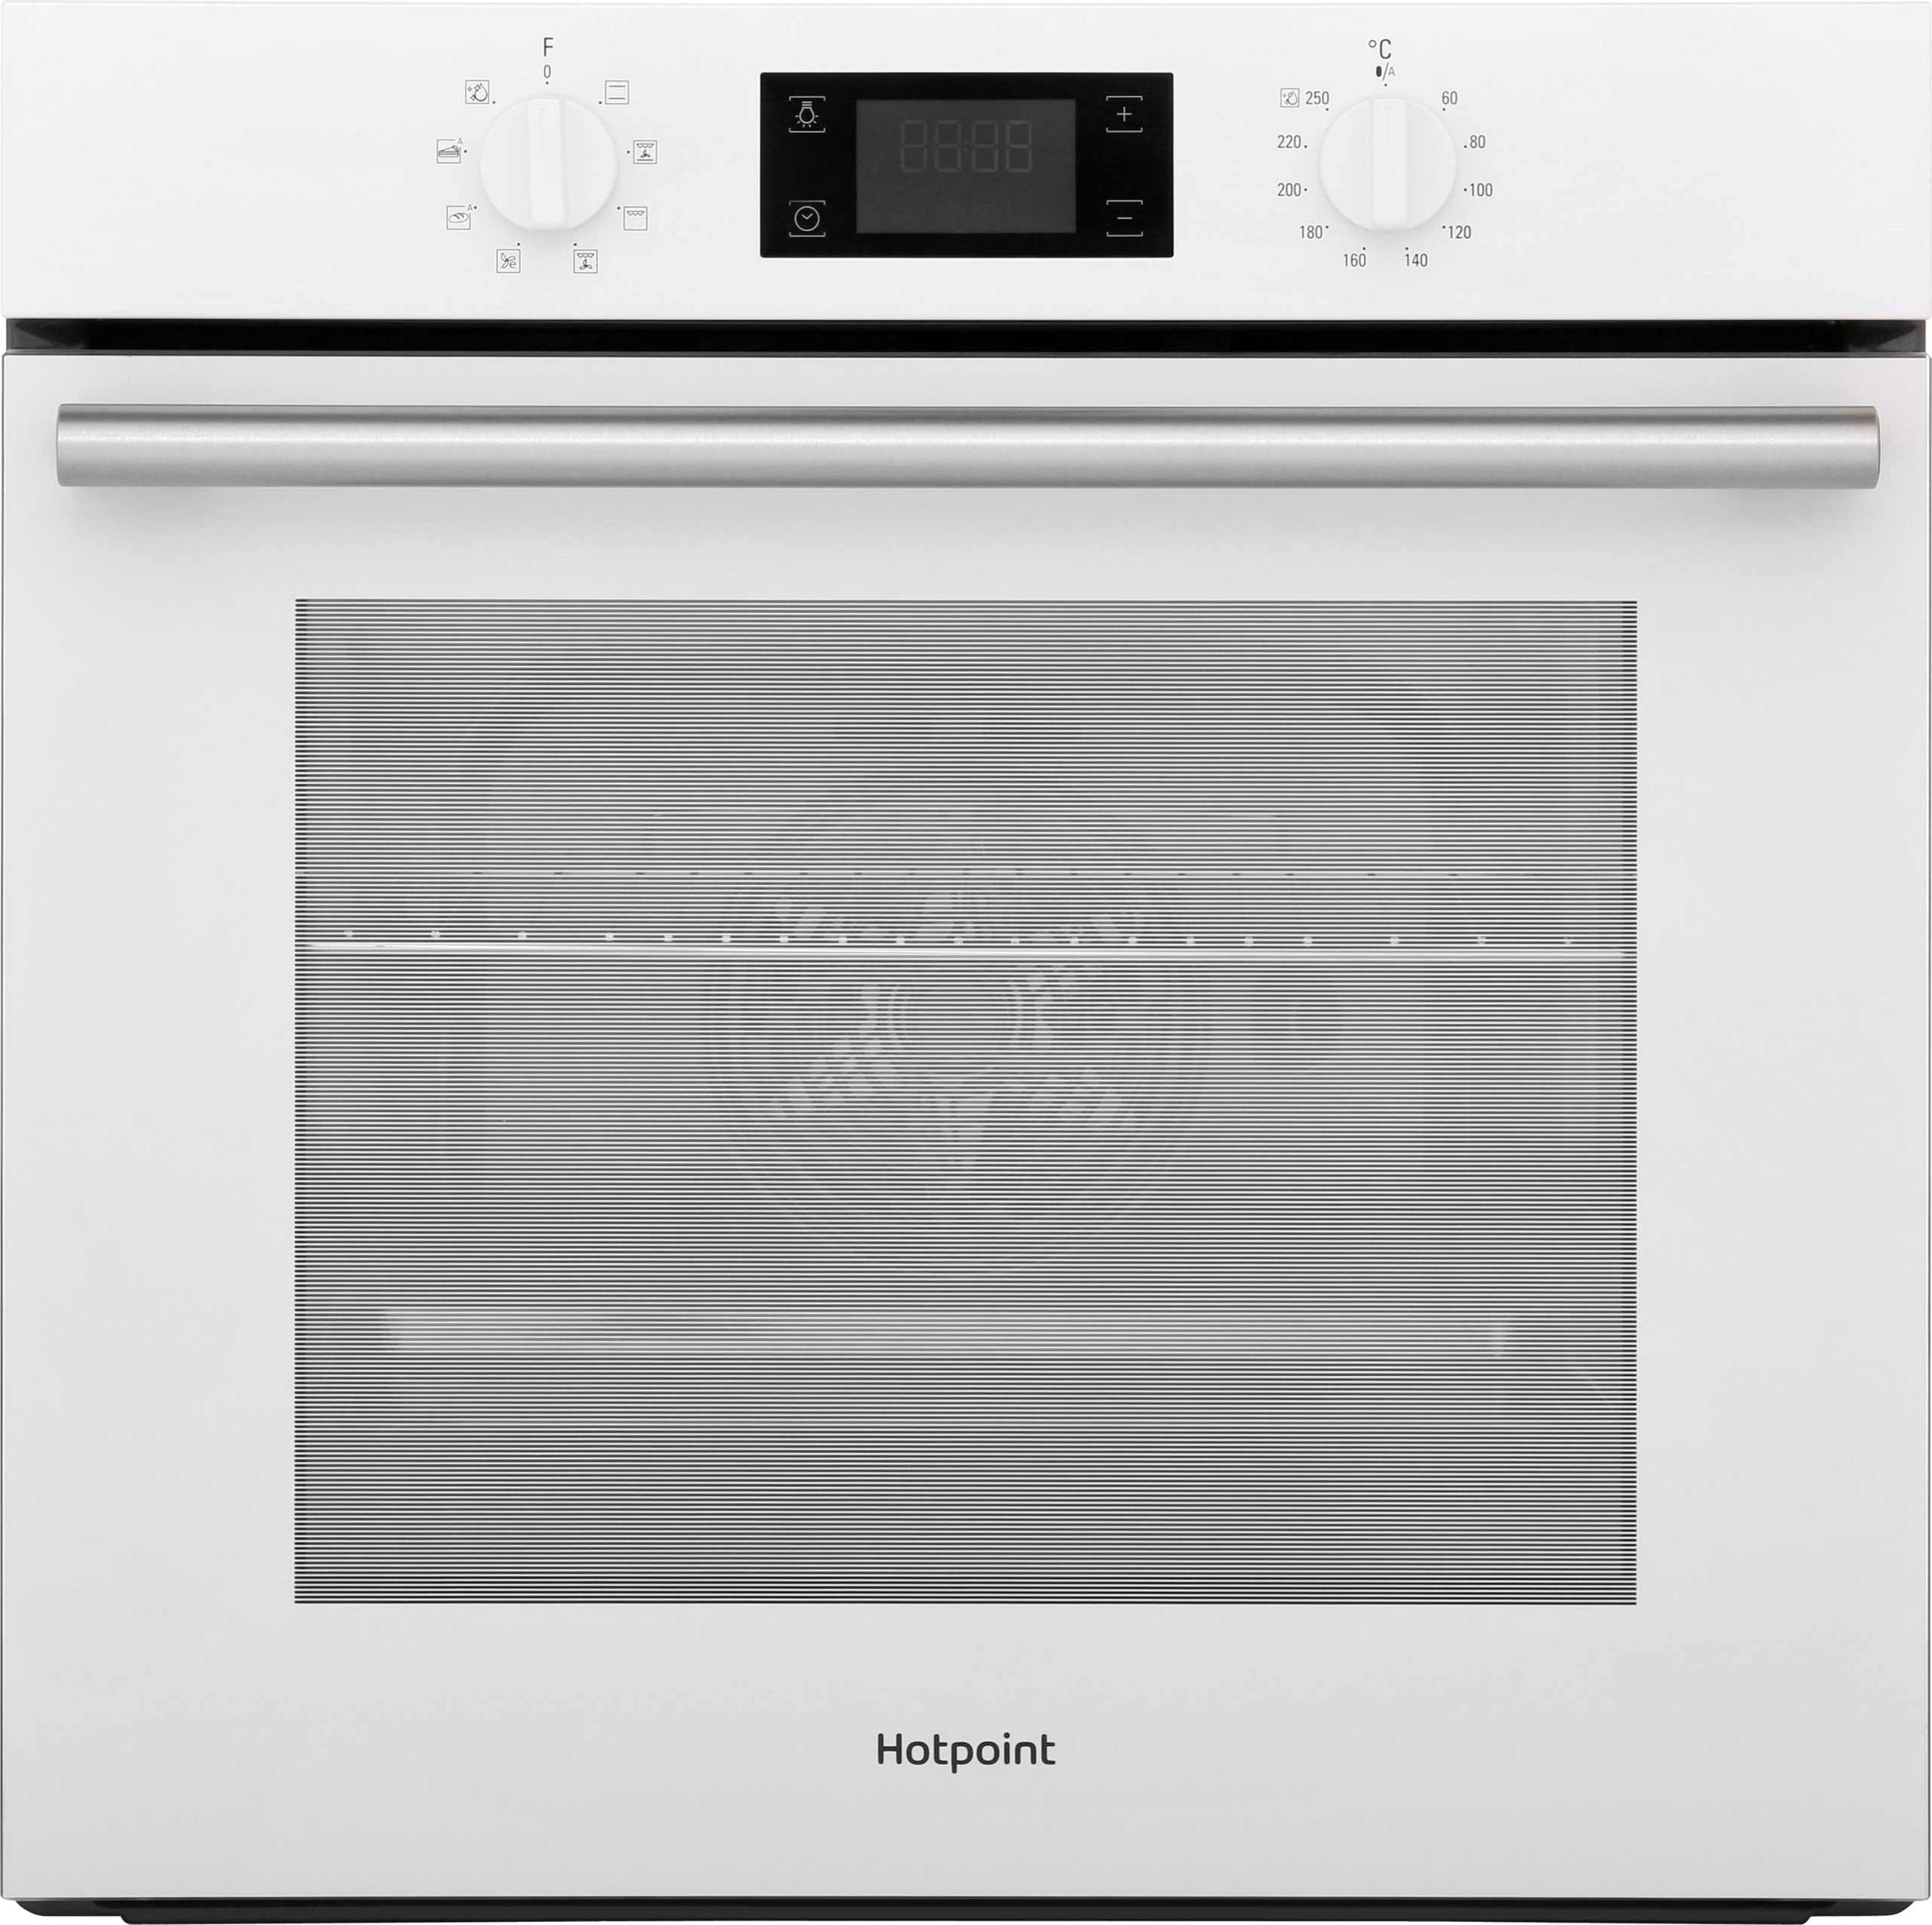 Hotpoint Class 2 SA2540HWH Built In Electric Single Oven - White - A Rated, White